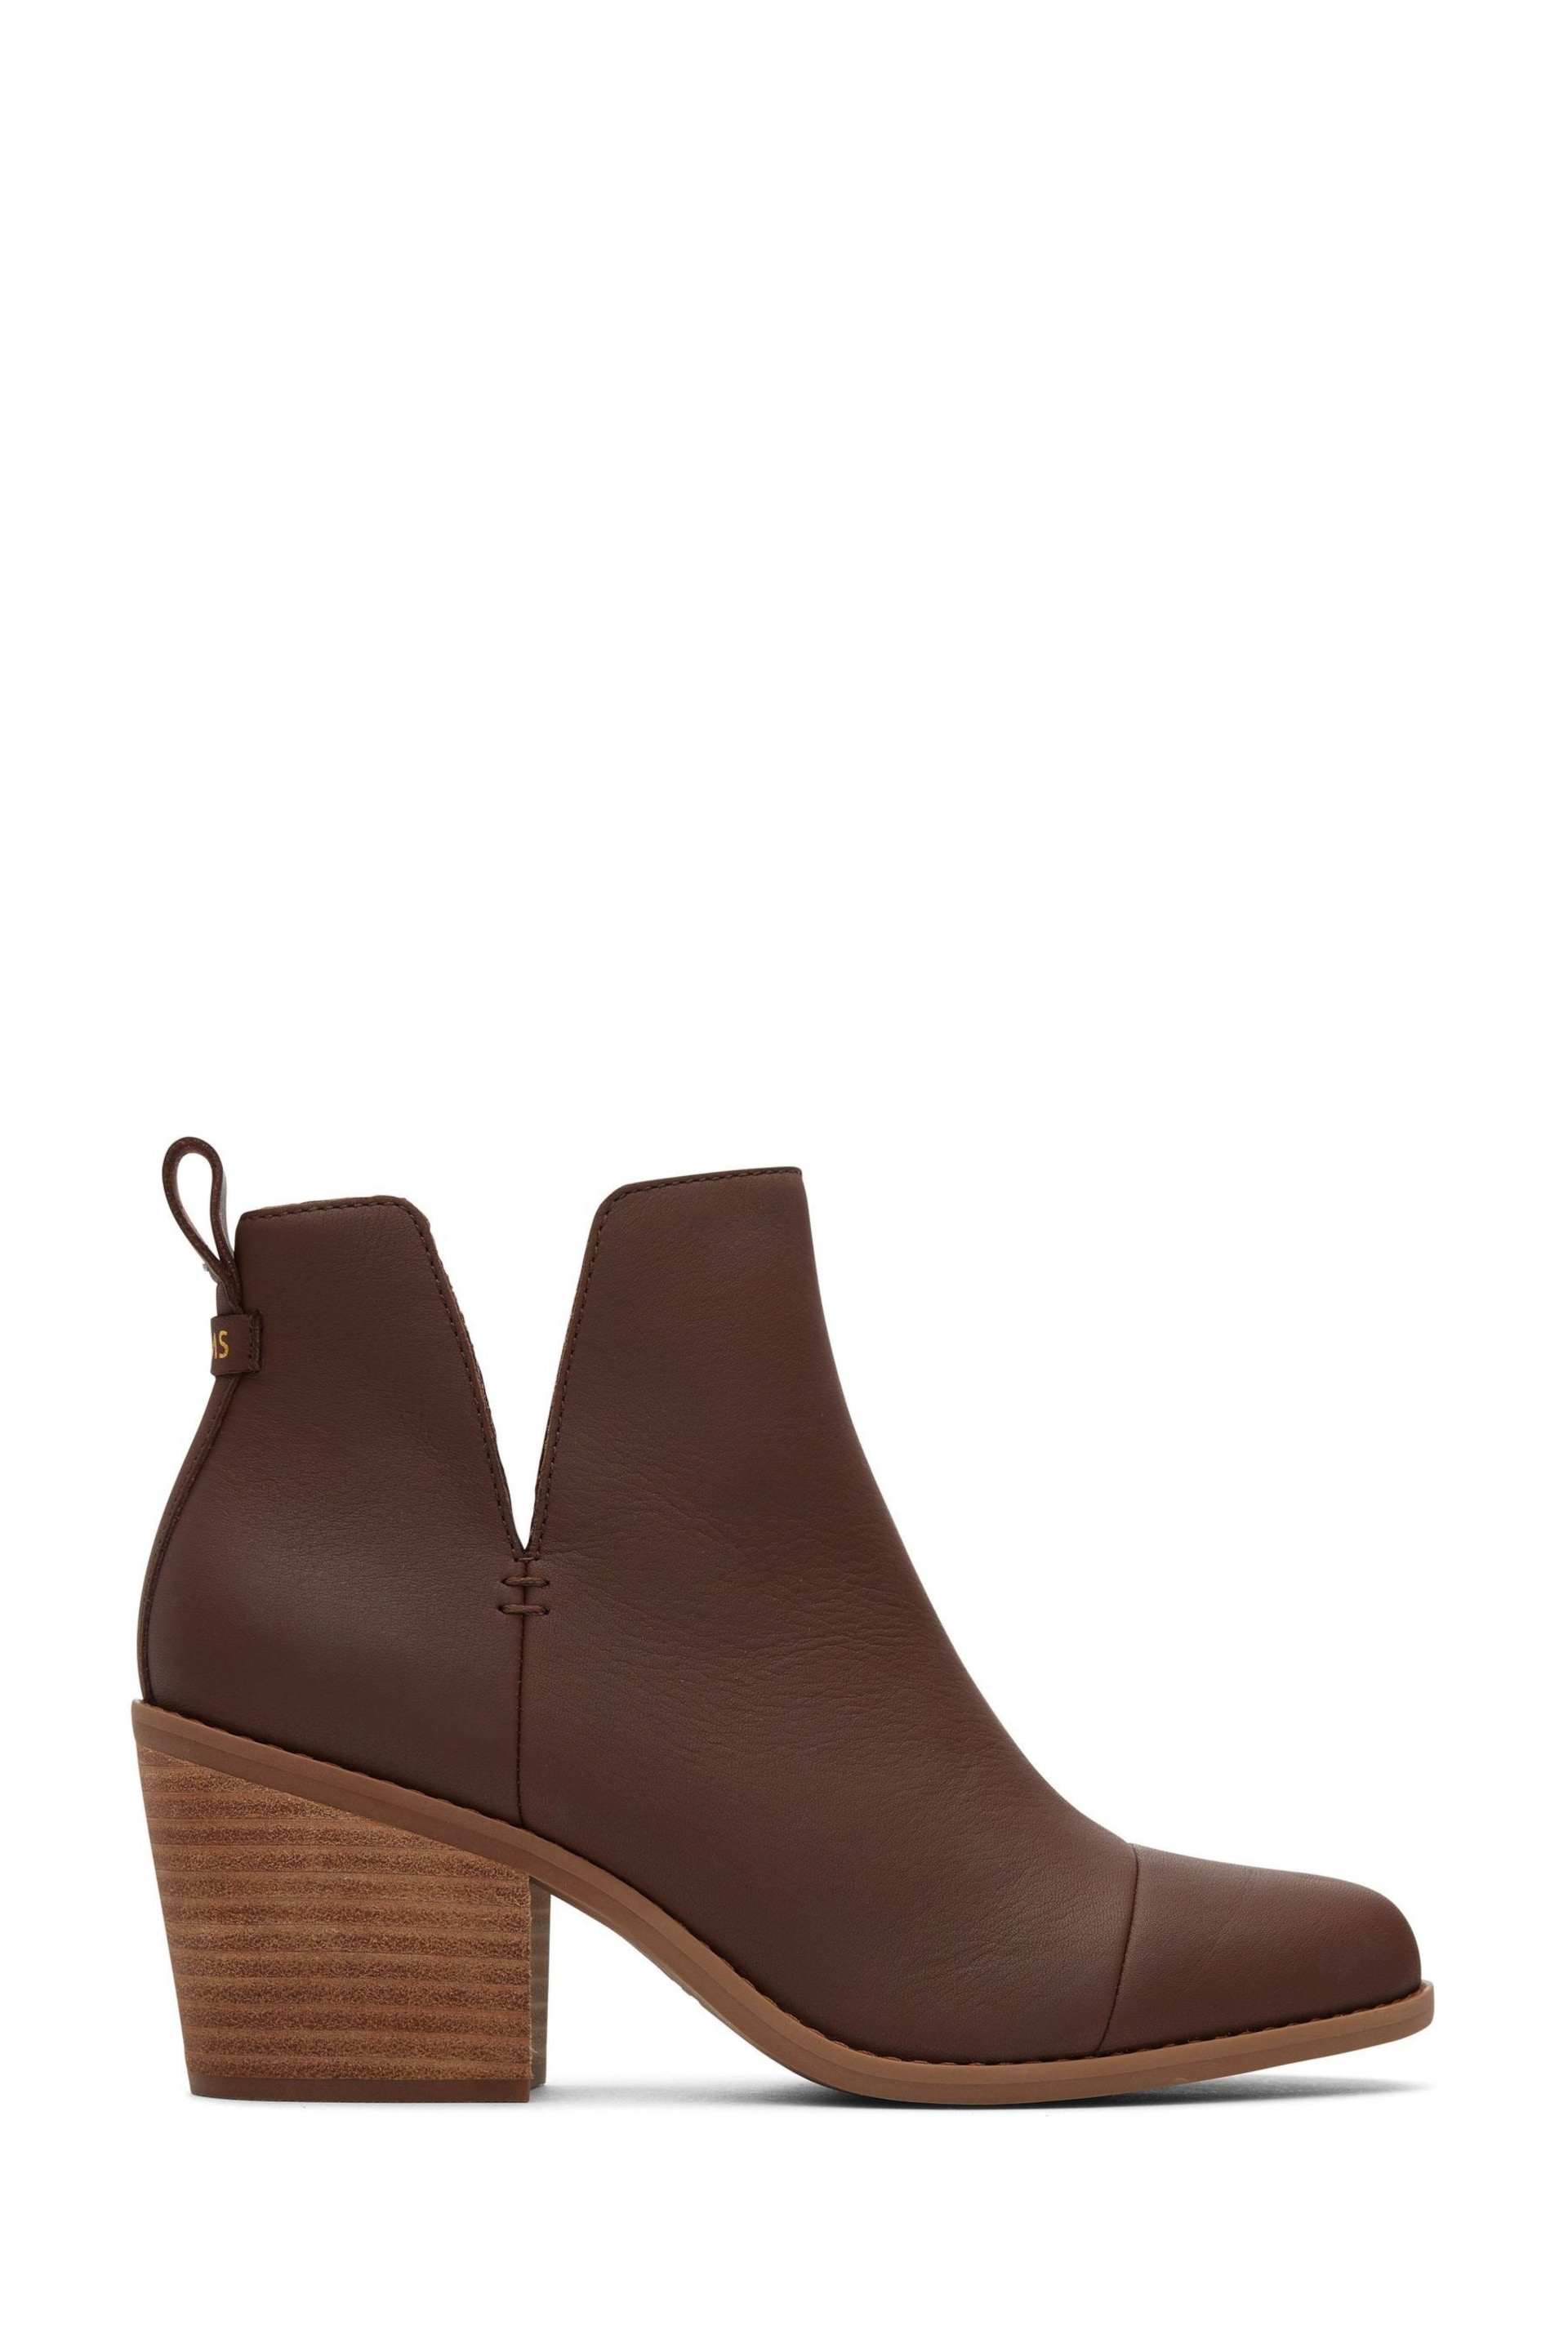 TOMS Everly Cutout Leather Boots - Image 1 of 5